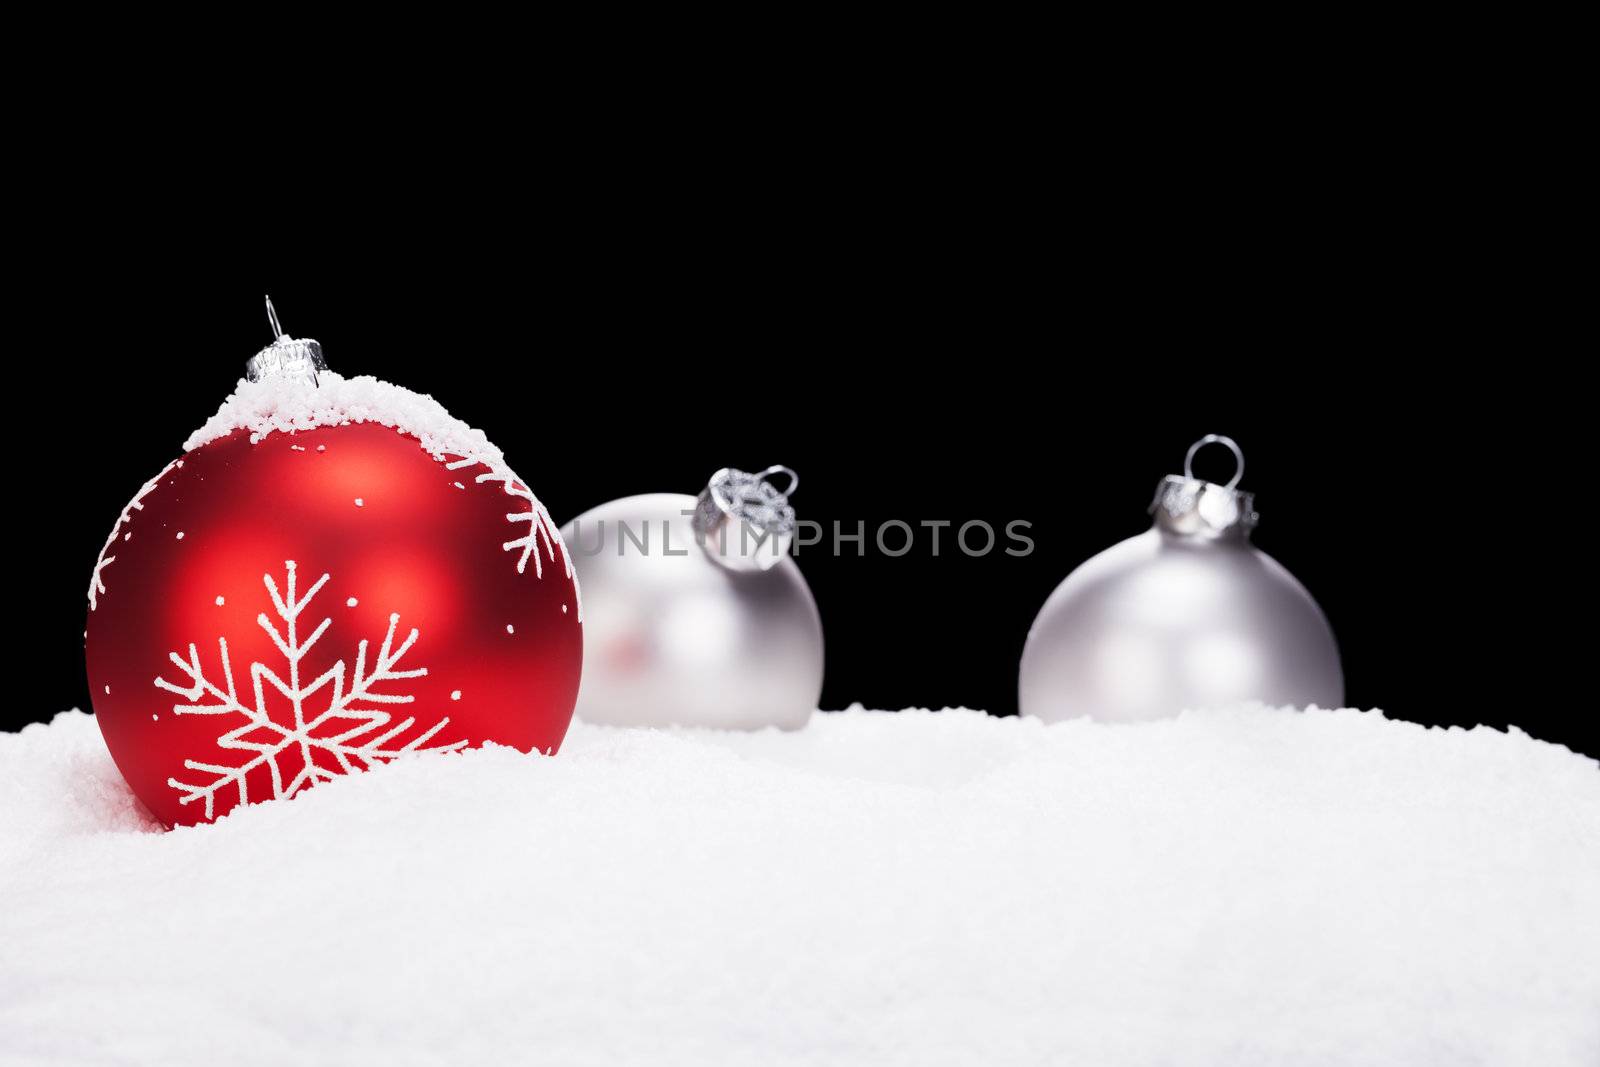 red christmas ball in front of silver christmas balls in snow with black background